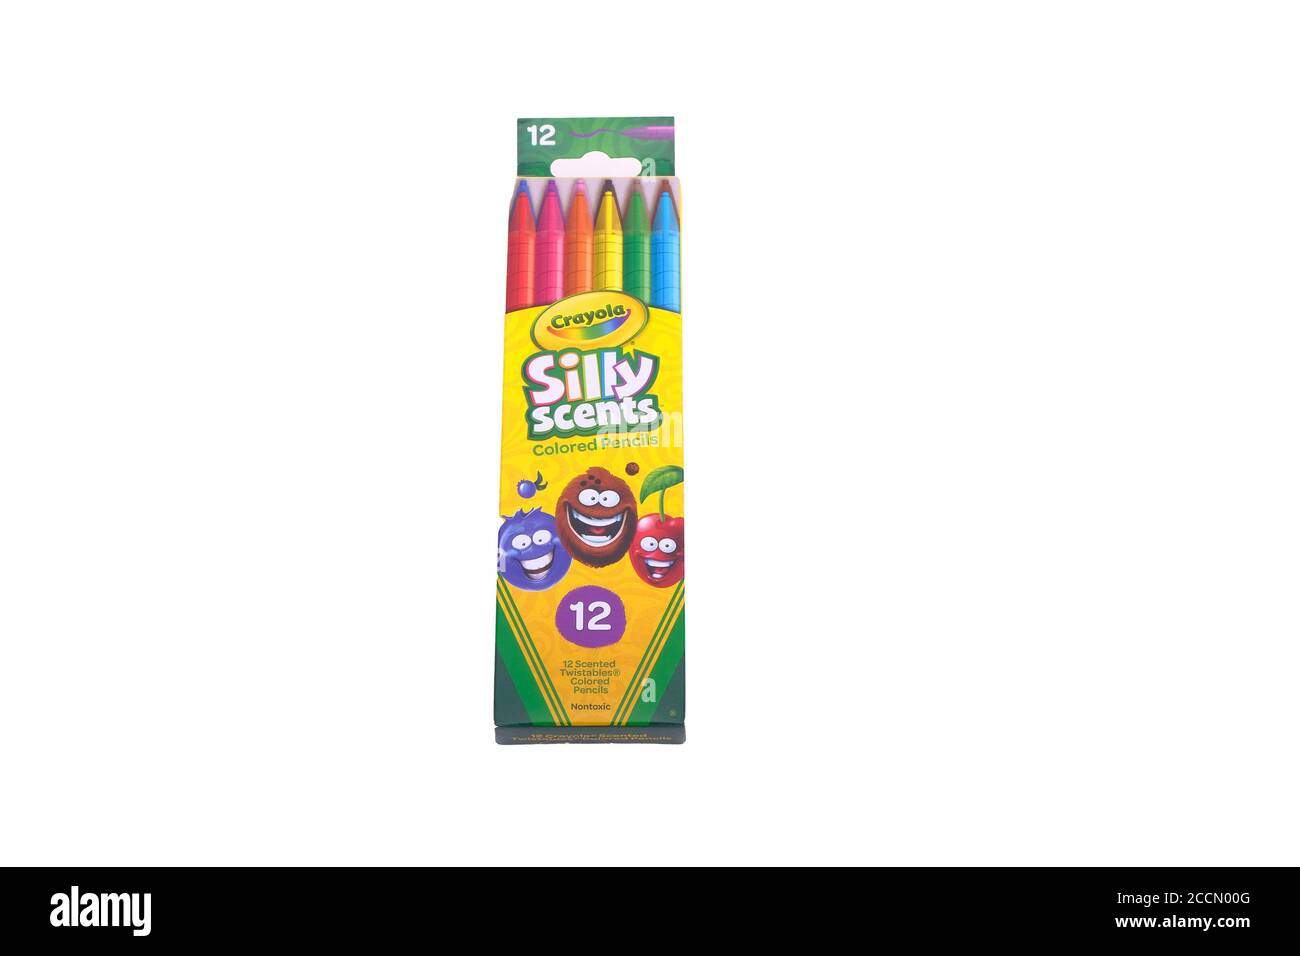 Crayola Silly Scents Stock Photo